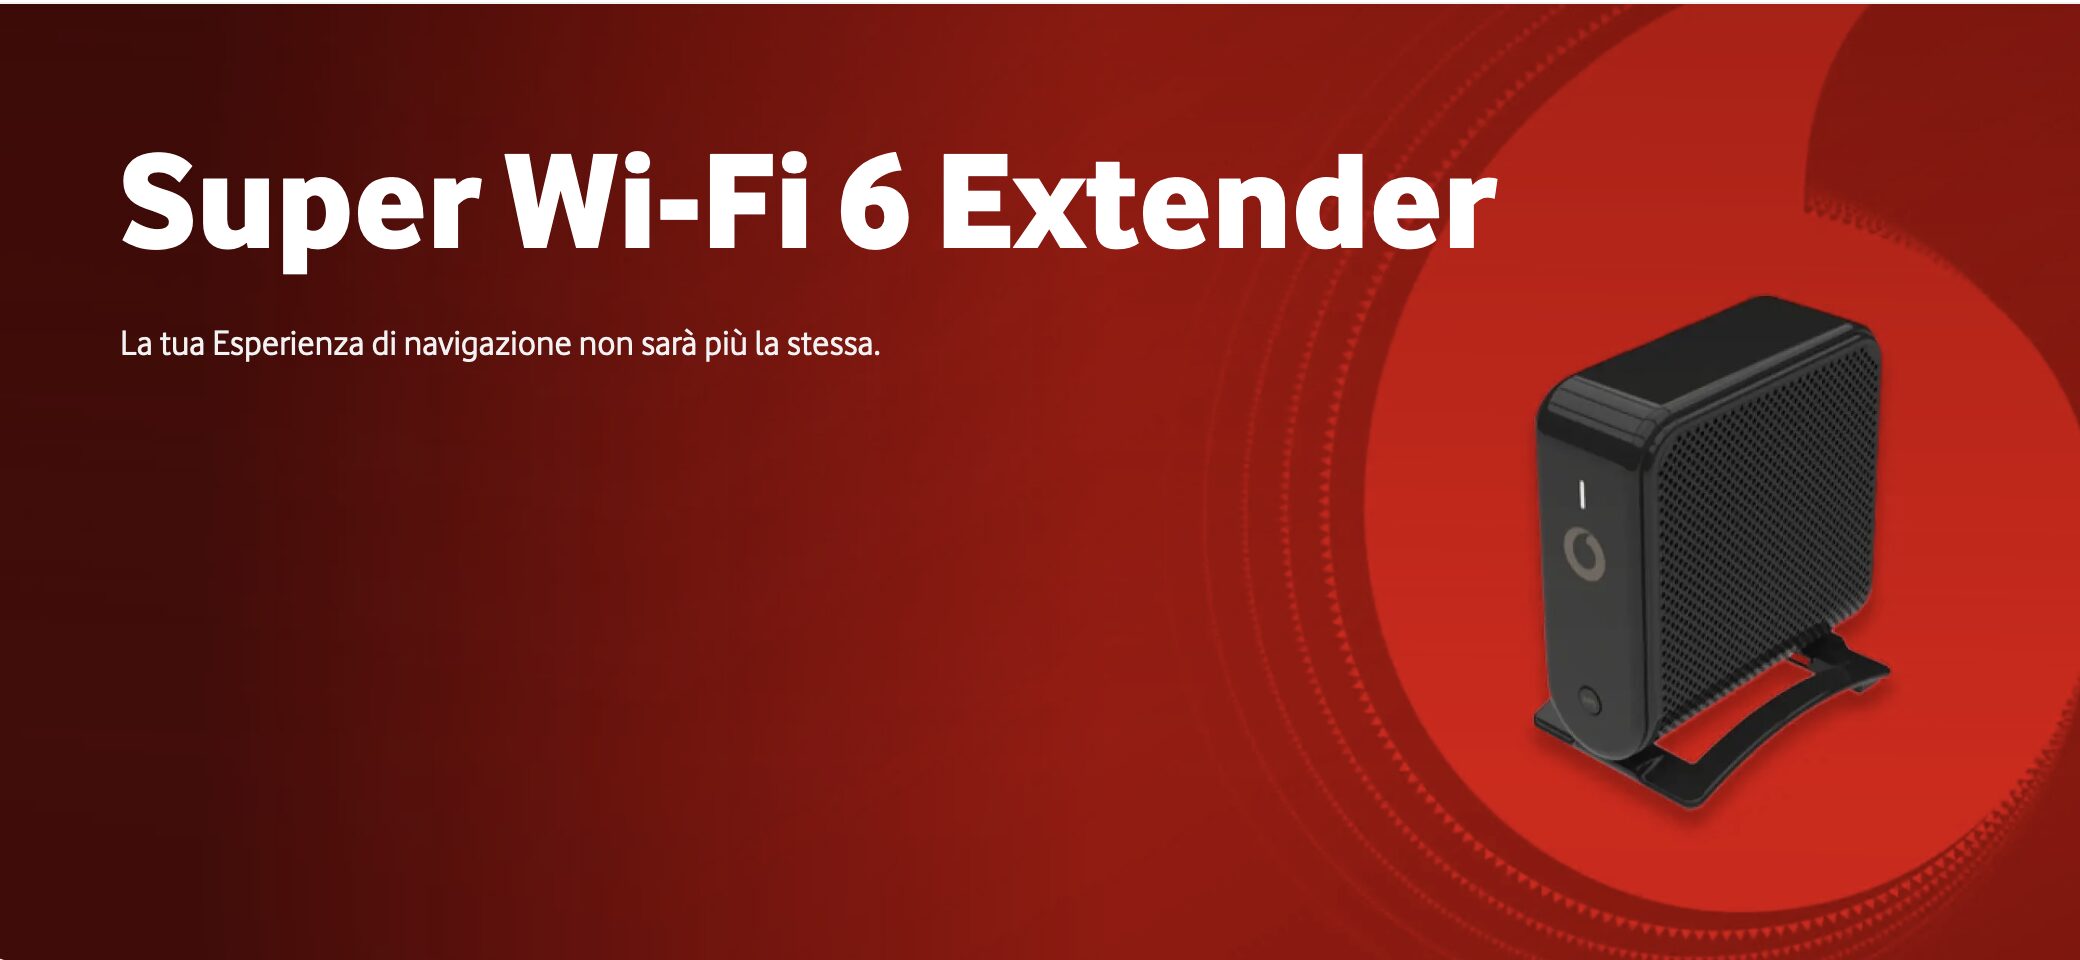 Vodafone launches the Super Wi-Fi 6 Extender